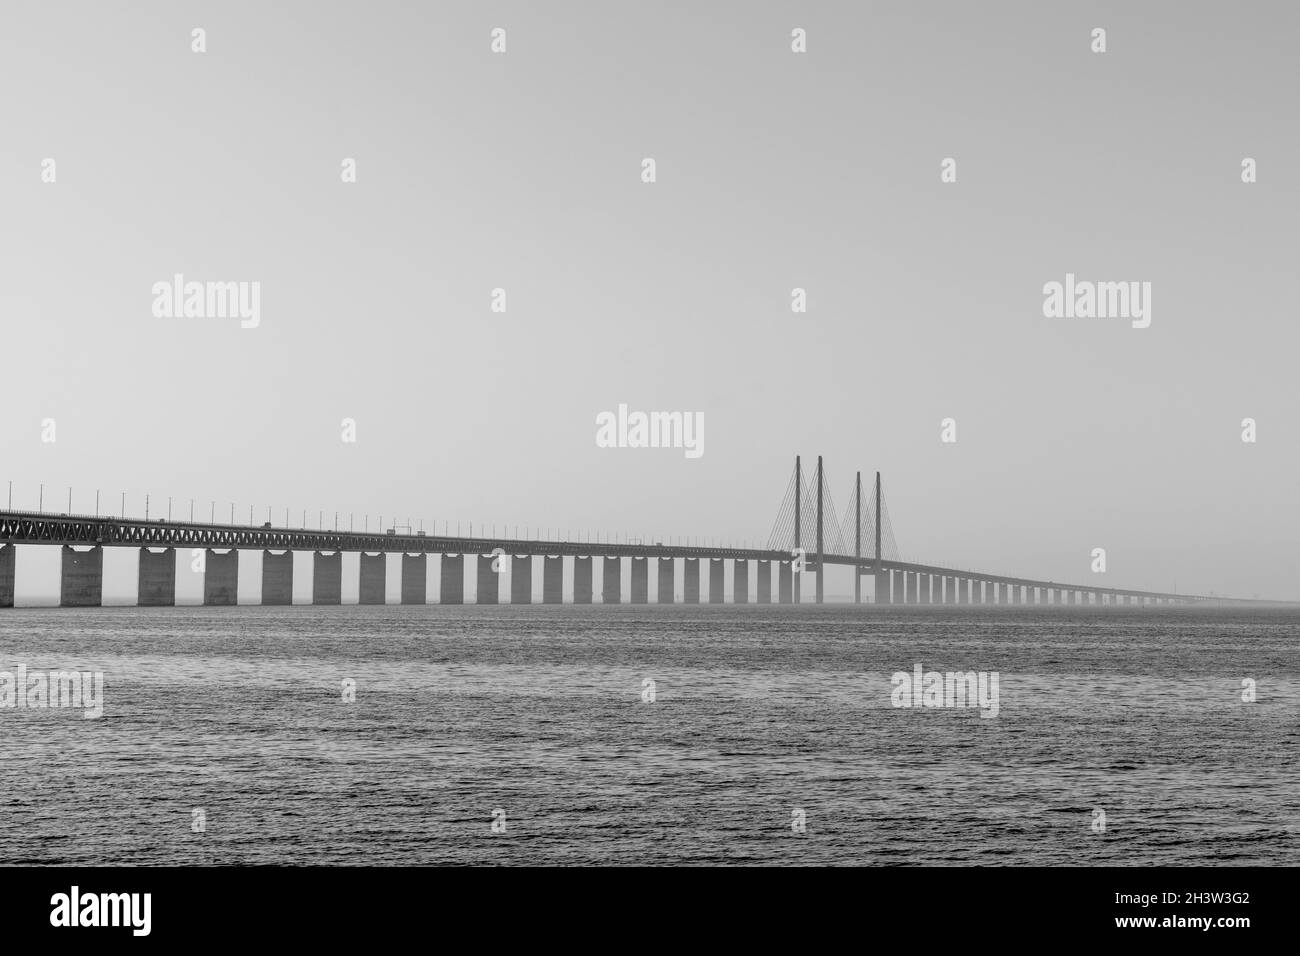 Black and white view of the Oresund Bridge between Denmark and Sweden Stock Photo